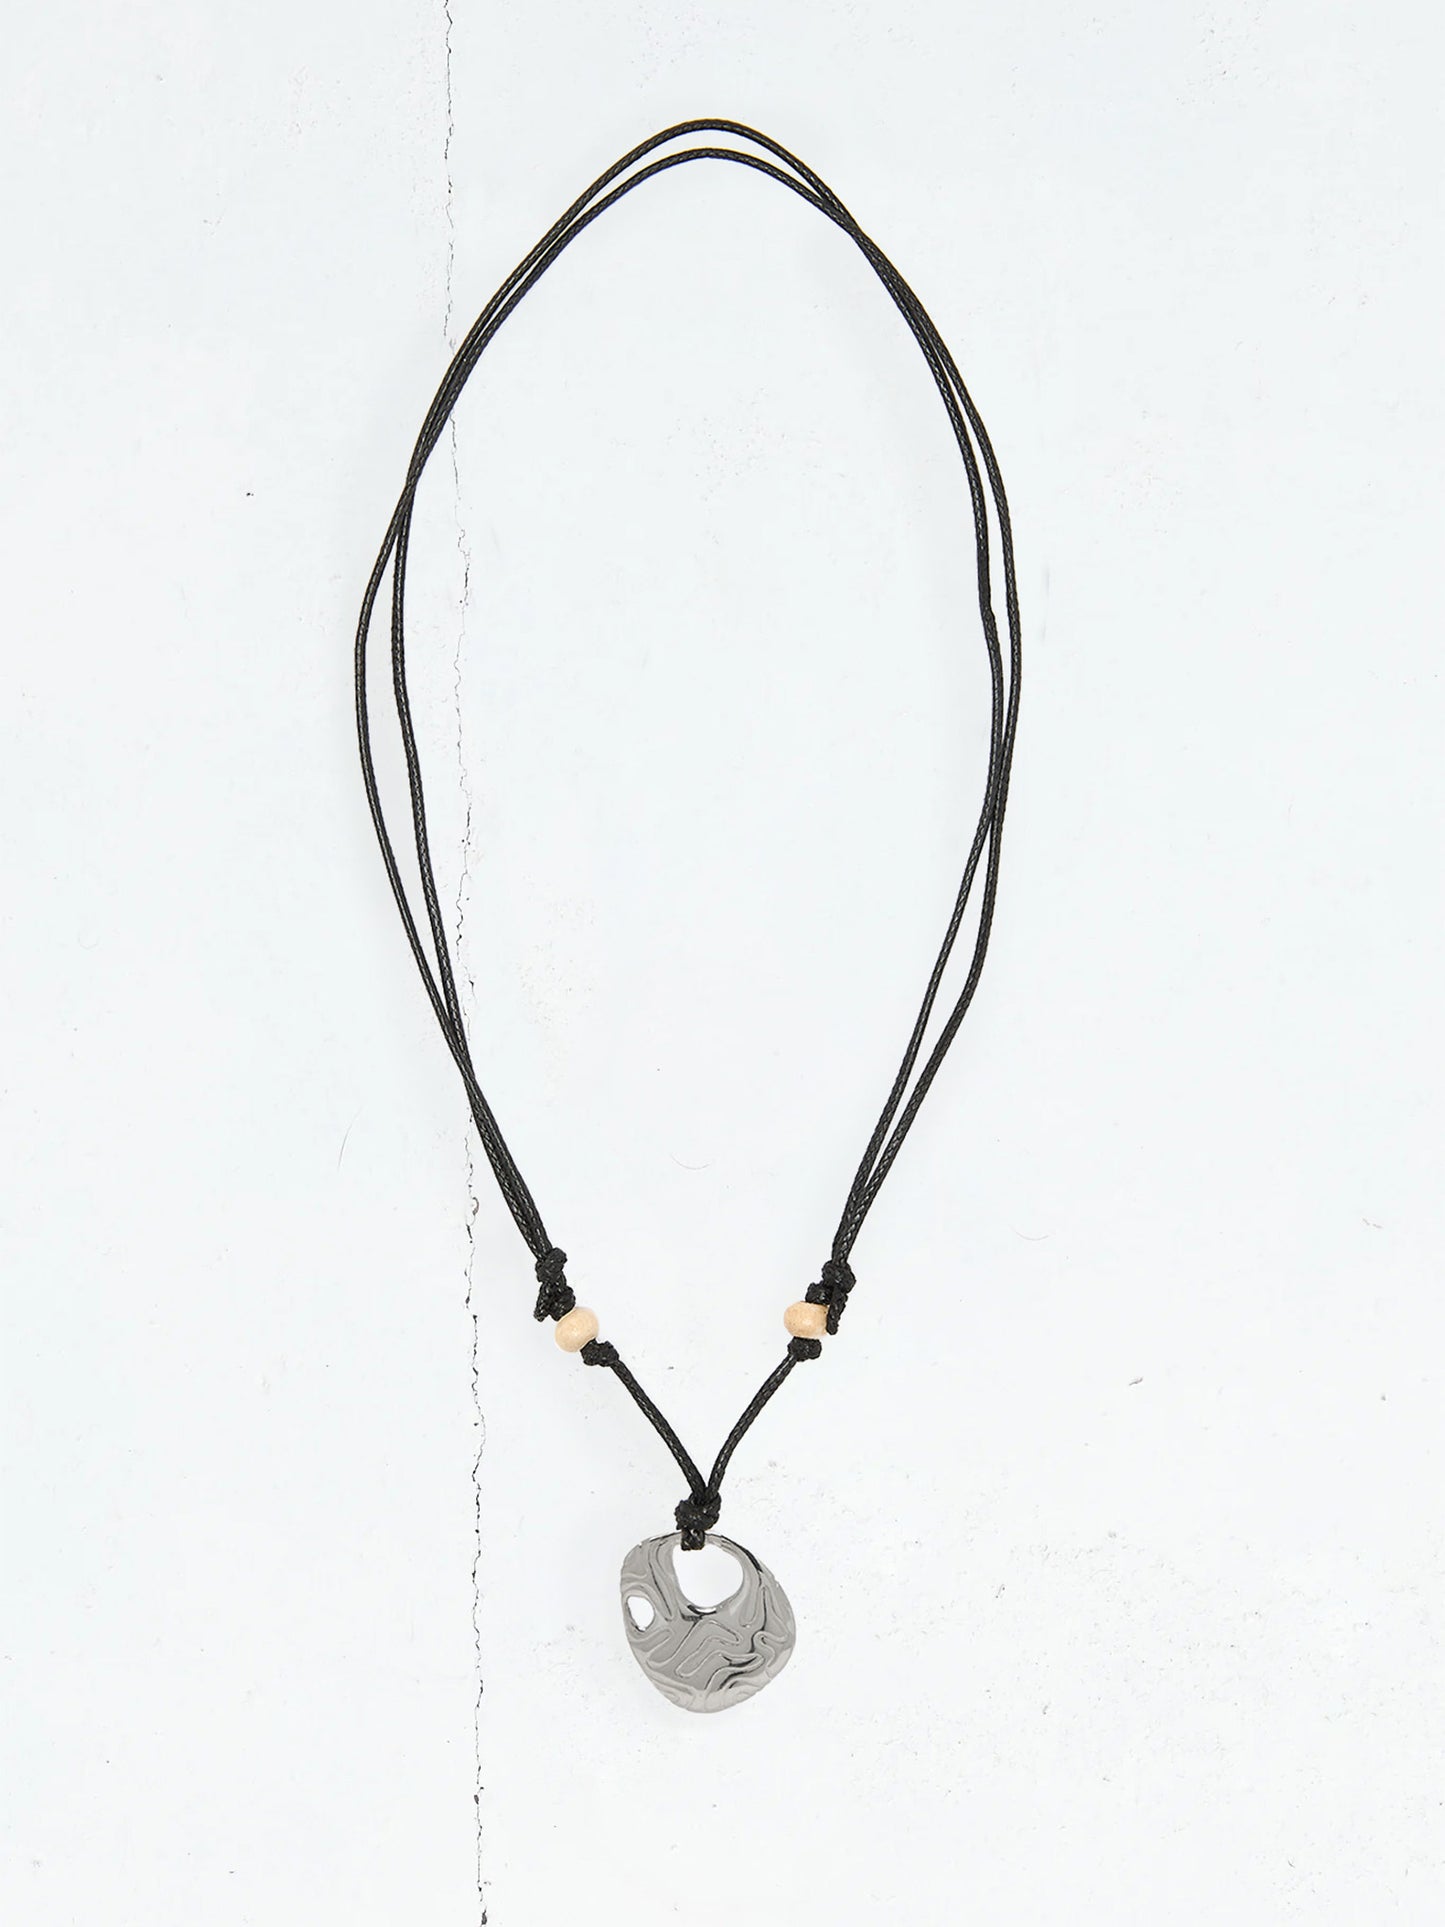 Story mfg. x octi Necklace (1)